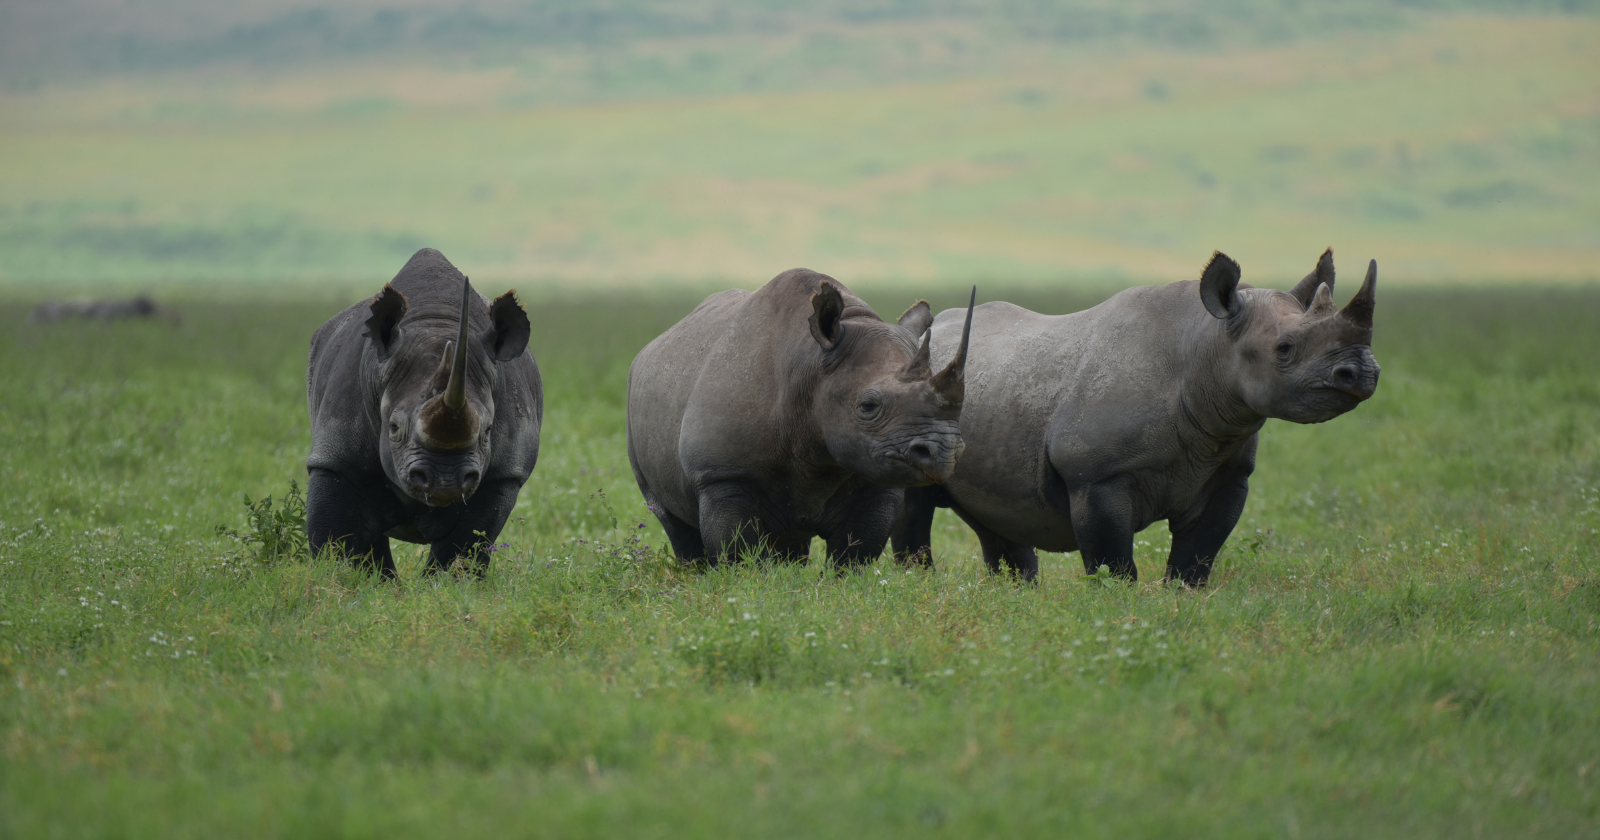 With its "Rhino Bonds", the World Bank is calling on investors to save the black rhinos